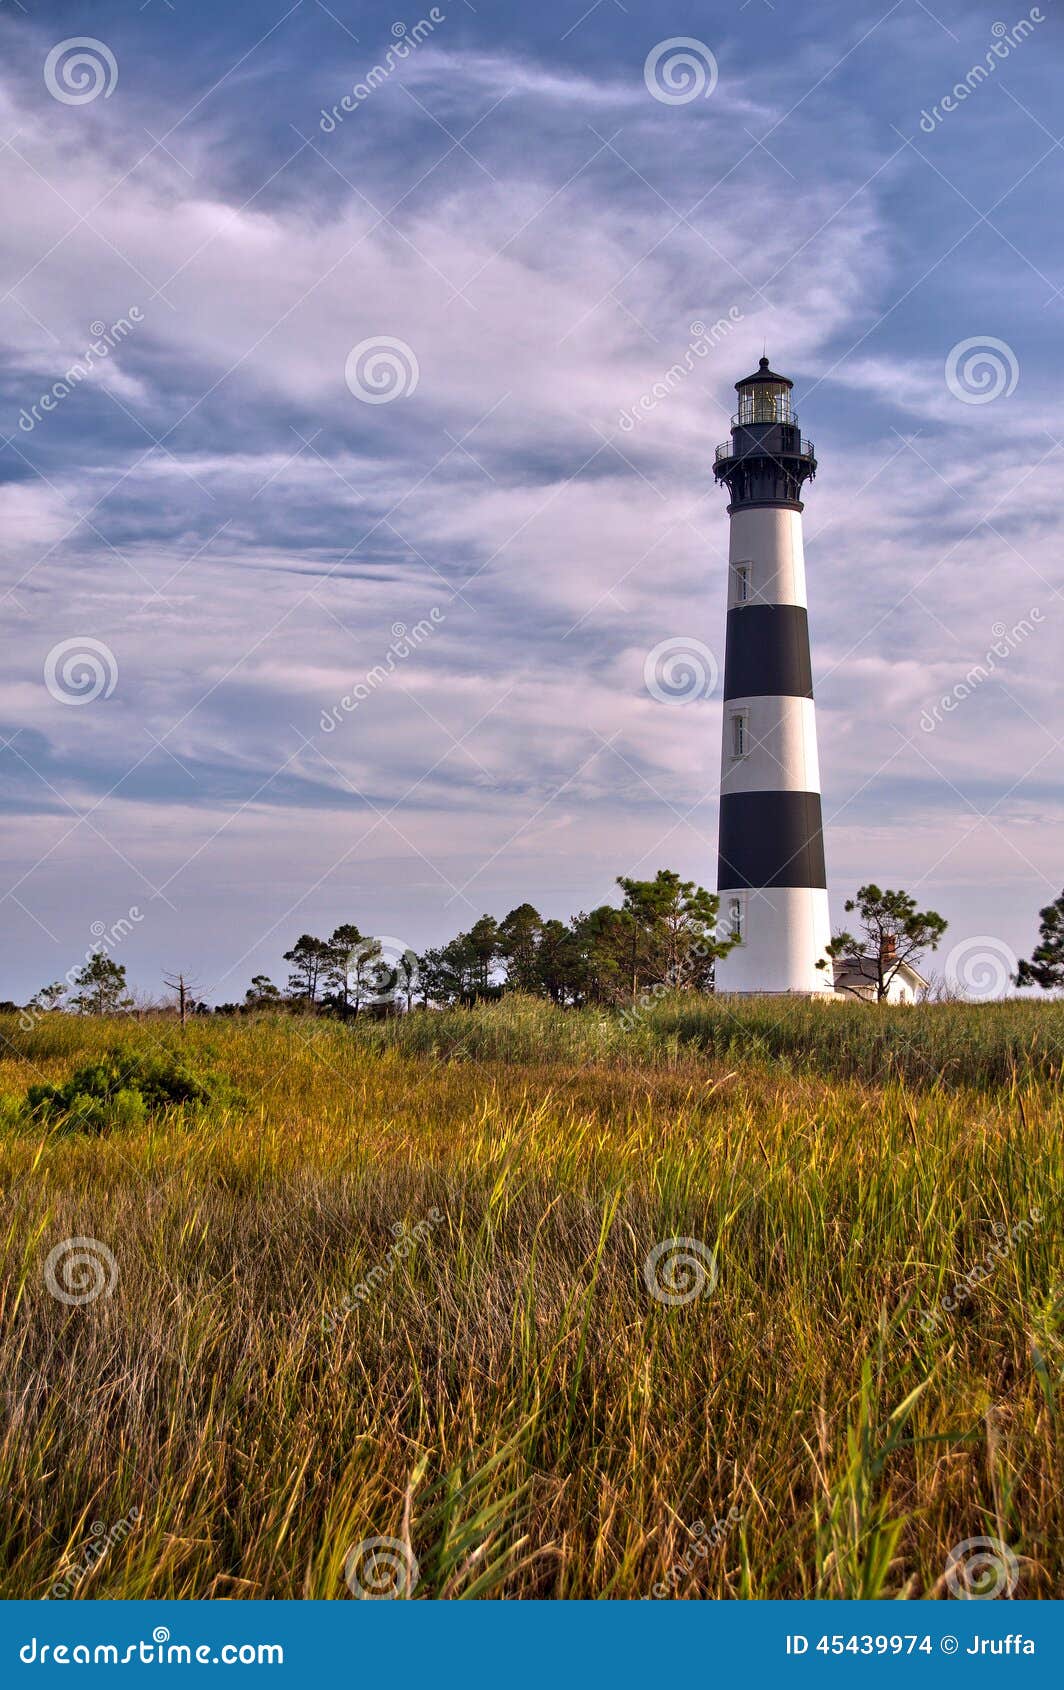 lighthouse surrounded by clouds and marshland